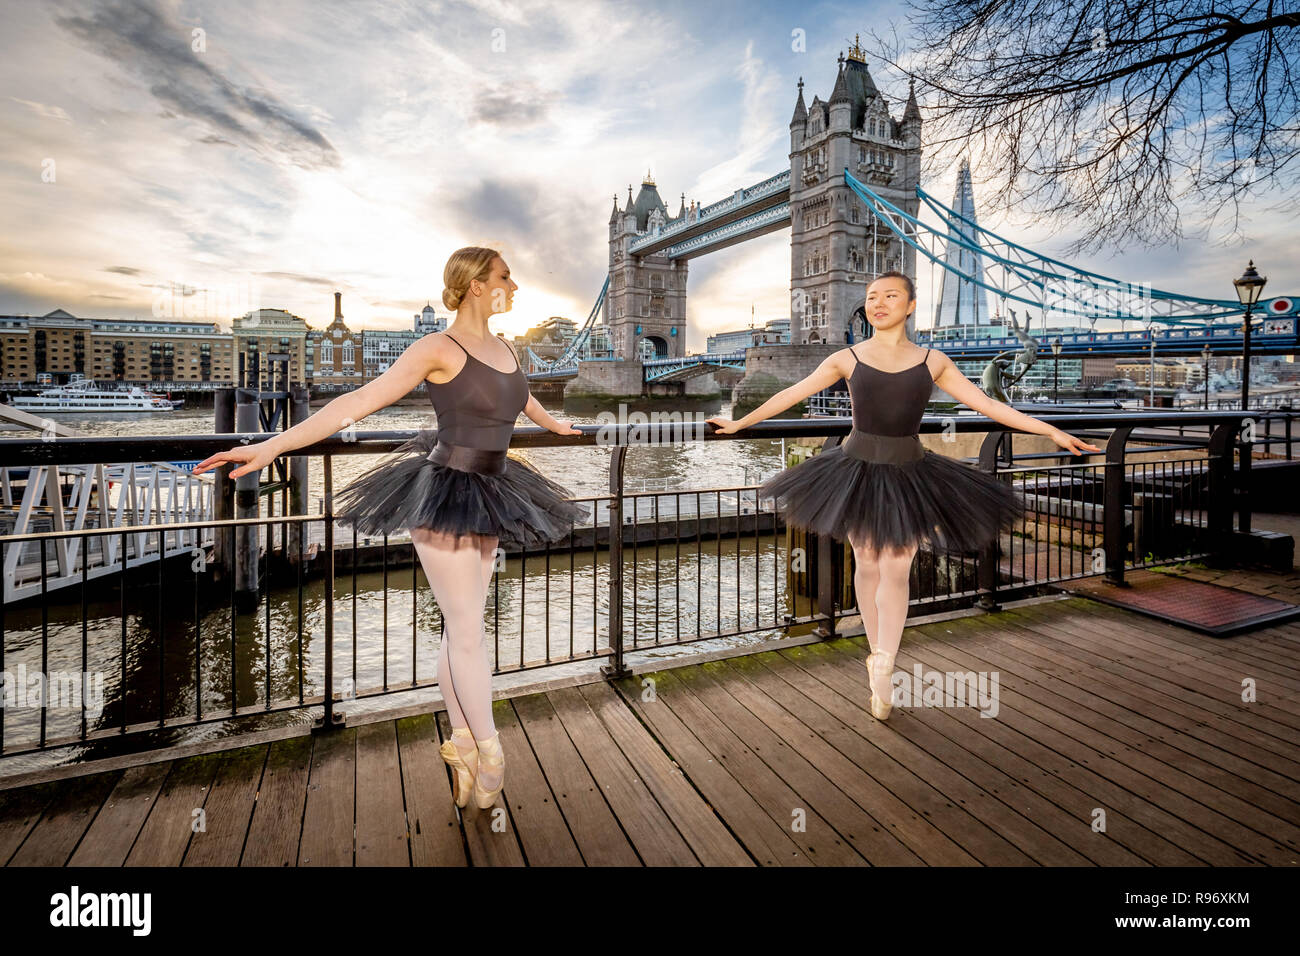 London, UK. 20th December, 2018. Dancers from Semaphore Ballet Company perform at Tower Hill in the last evening sun before the winter solstice. Tonight will be the longest night of the year with the sun not rising until 08:03 GMT on Friday morning. Dancers pictured(L-R) Beth Wareing and Natsuki Uemura. Credit: Guy Corbishley/Alamy Live News Stock Photo